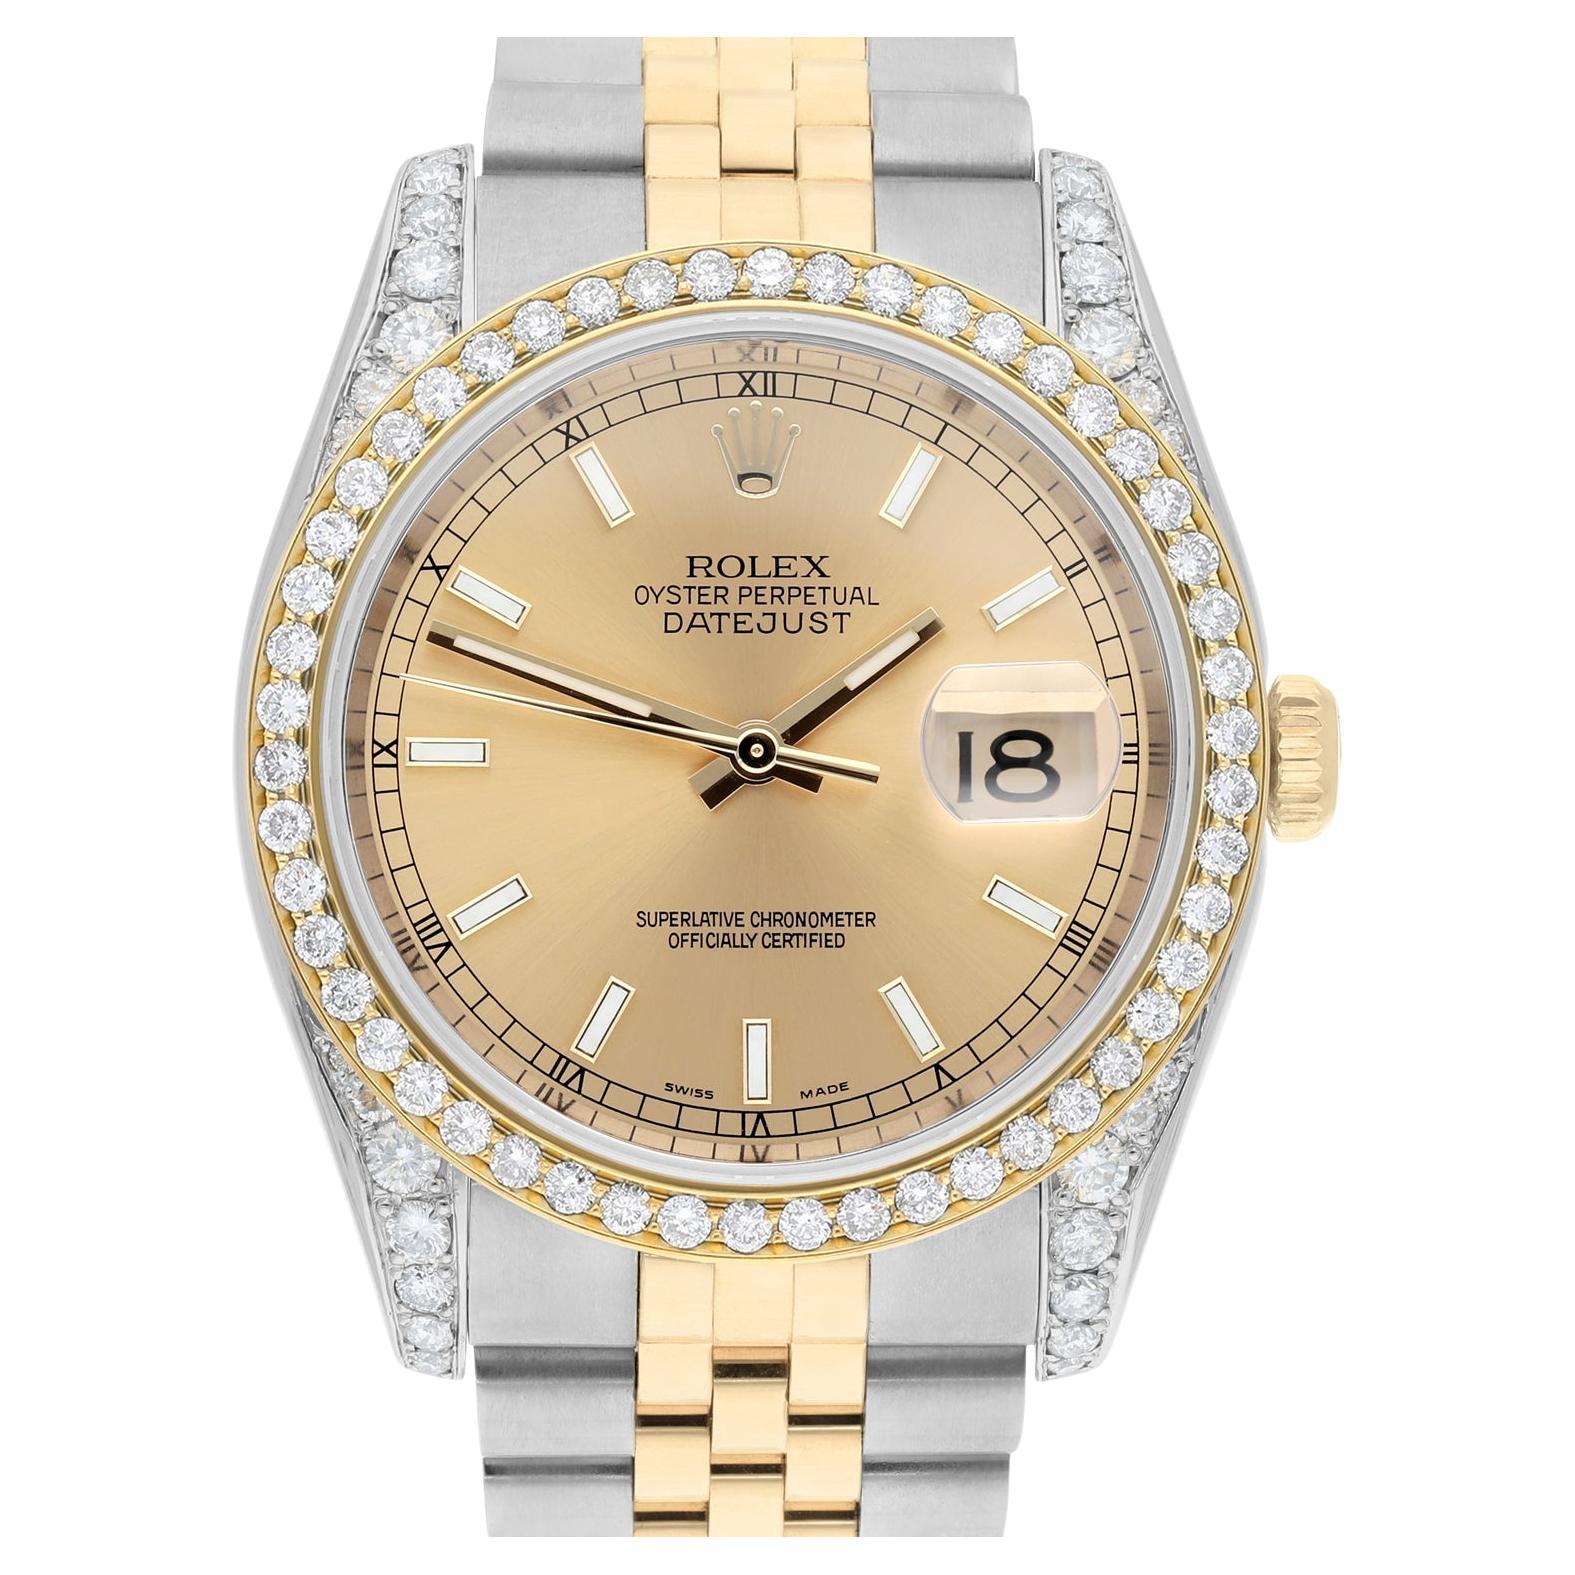 Rolex Datejust 36 Gold & Steel 116233 Champagne Index Dial Diamond Watch For Sale